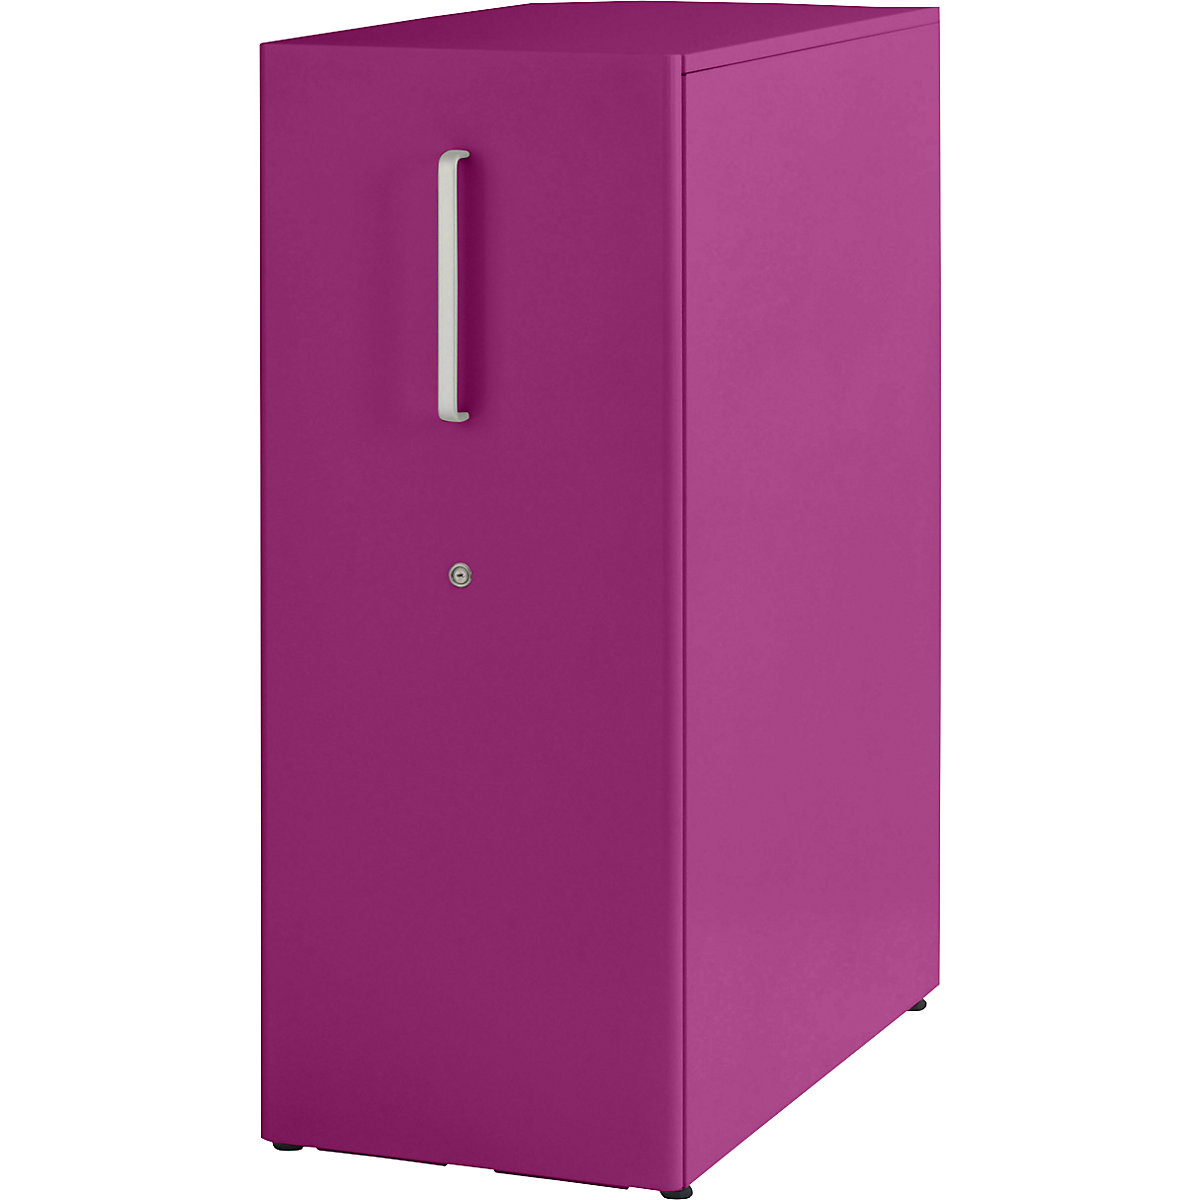 Tower™ 3 add-on furniture, with worktop – BISLEY, for the right side, 2 shelves, fuchsia-18